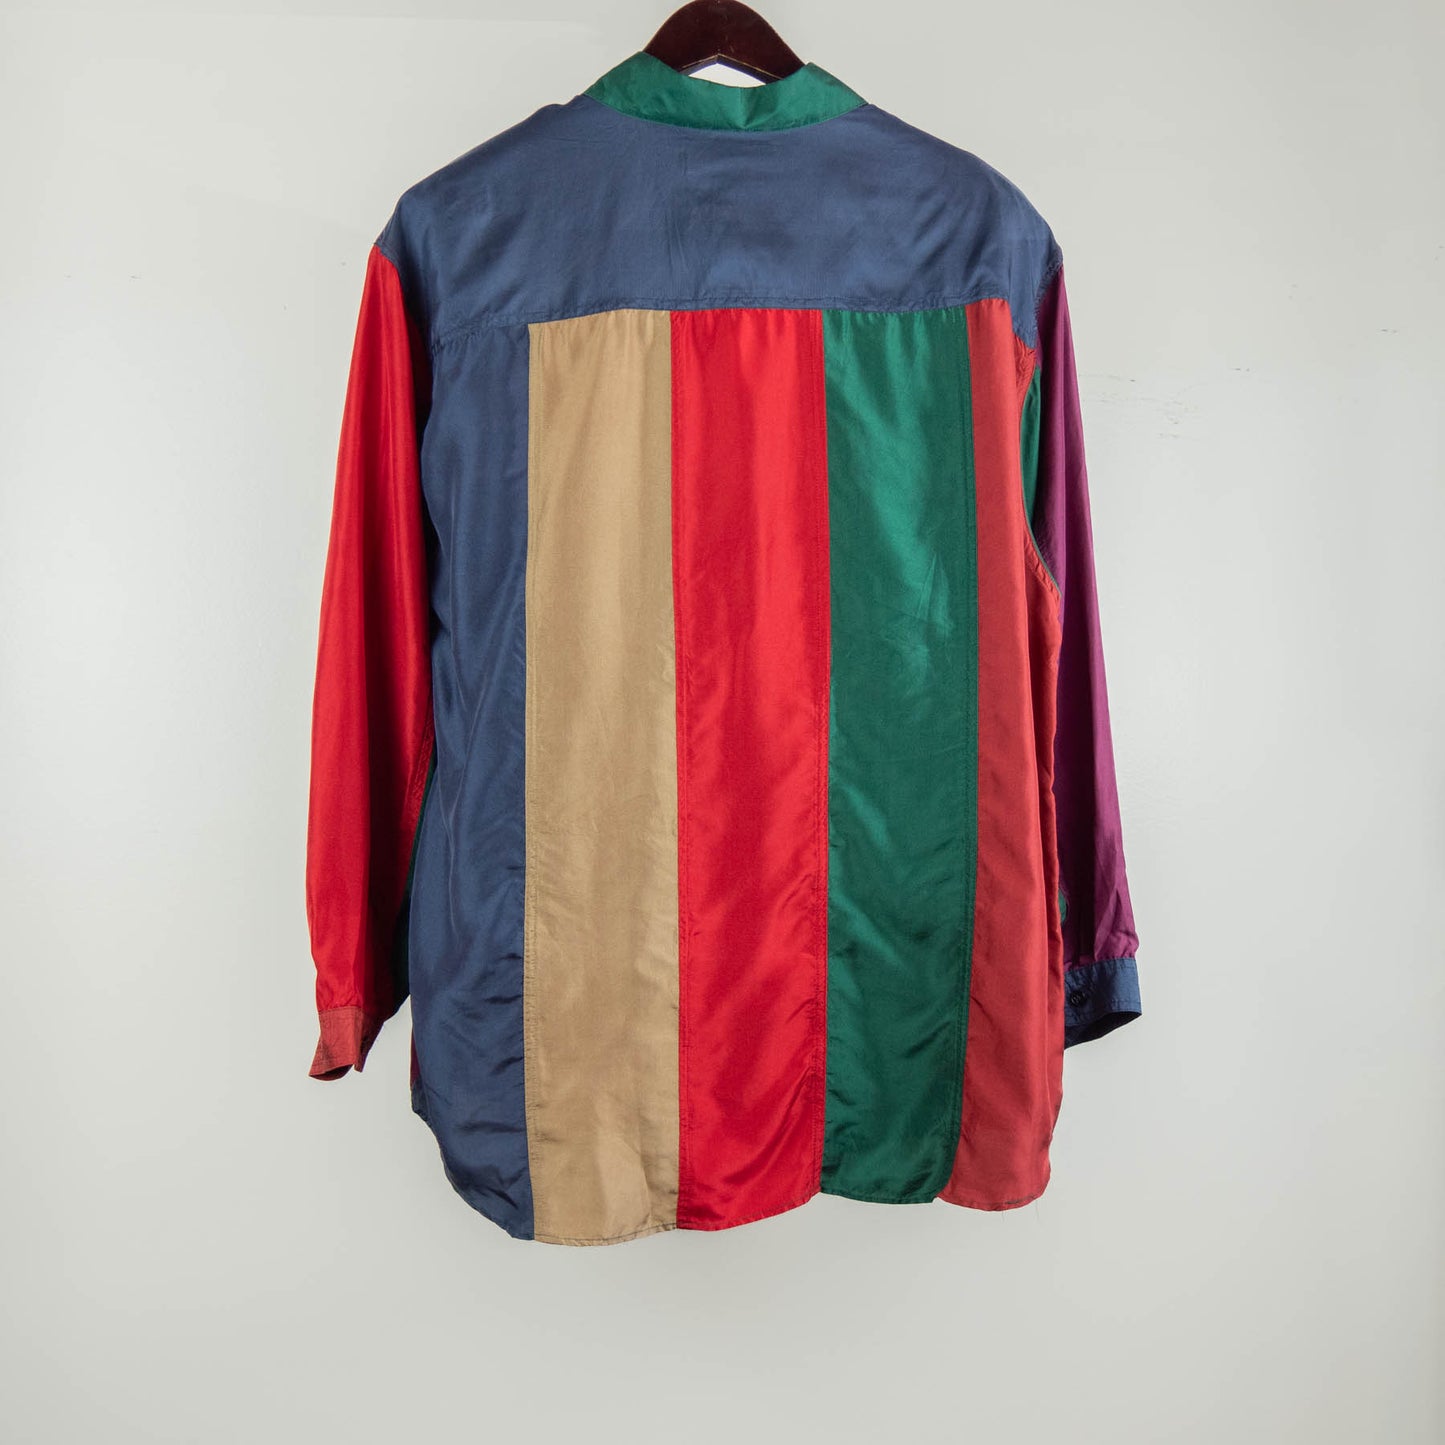 Classchic Couture - Stunt - Silk L/S Shirts - Green/ Red/ Navy